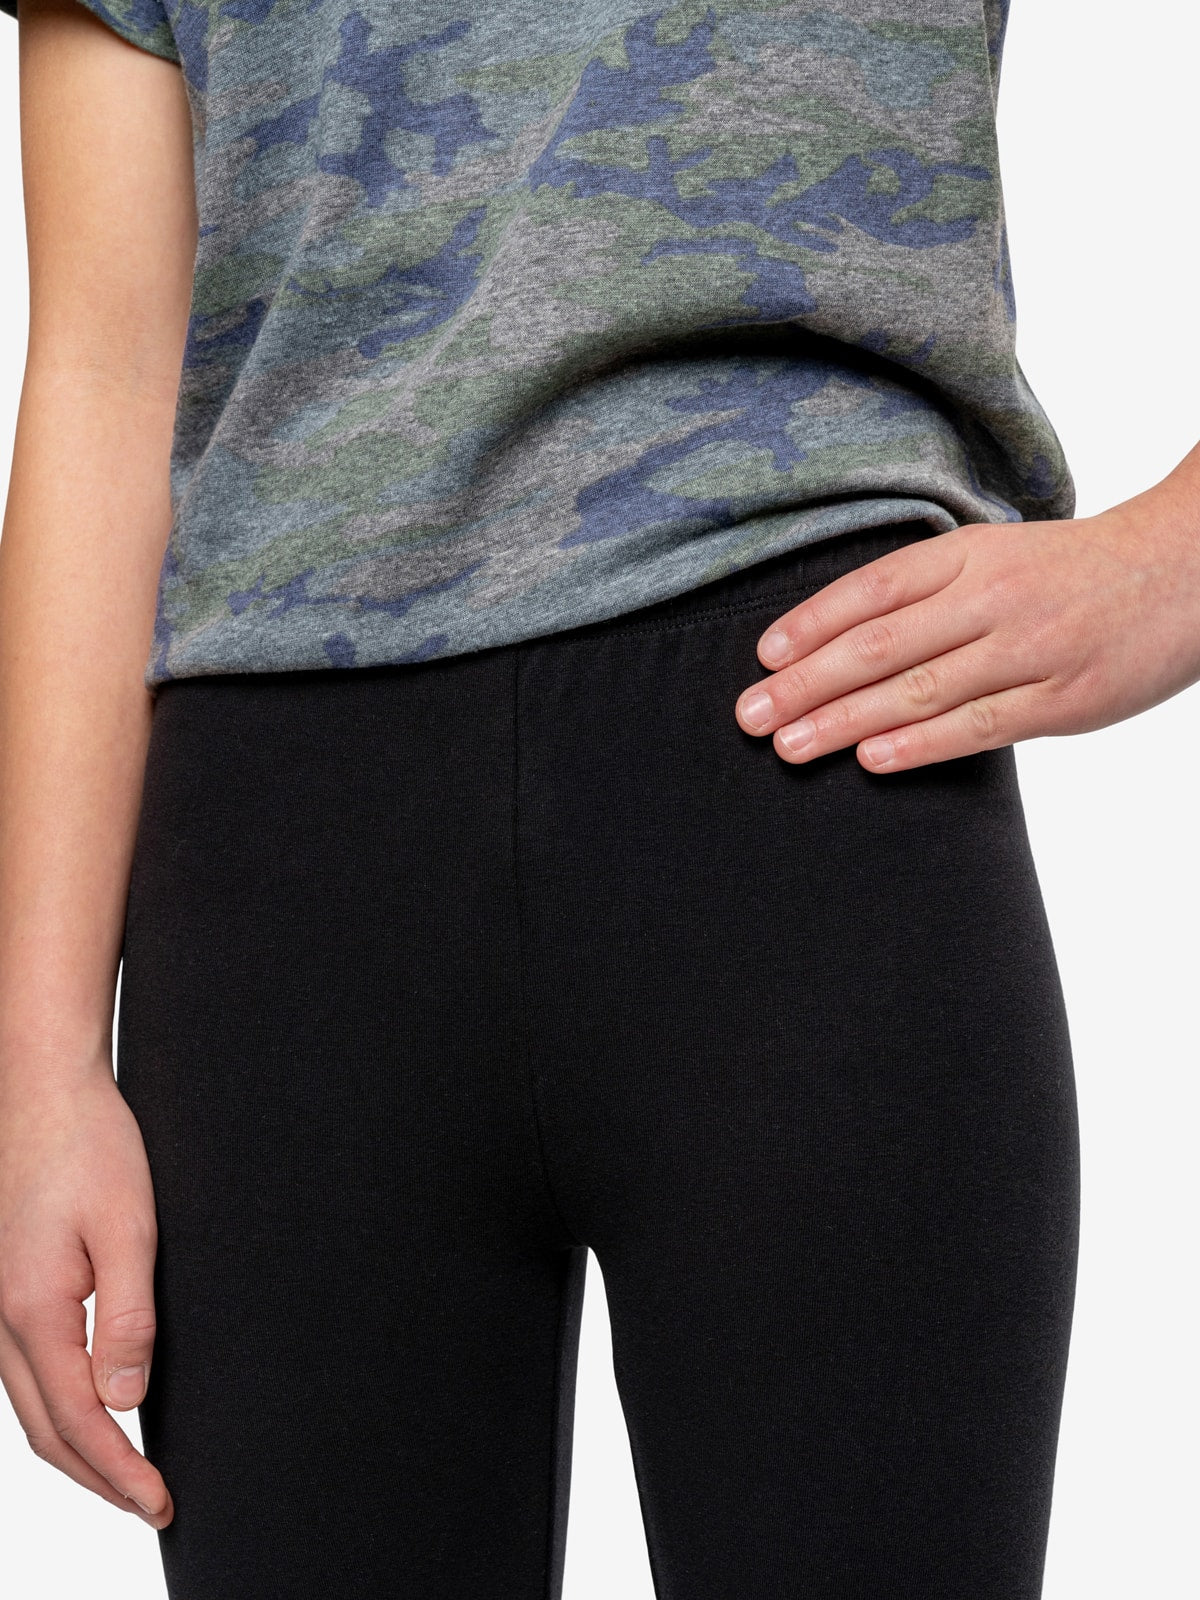 Women's Insect Shield® Pro Legging - Charcoal Print